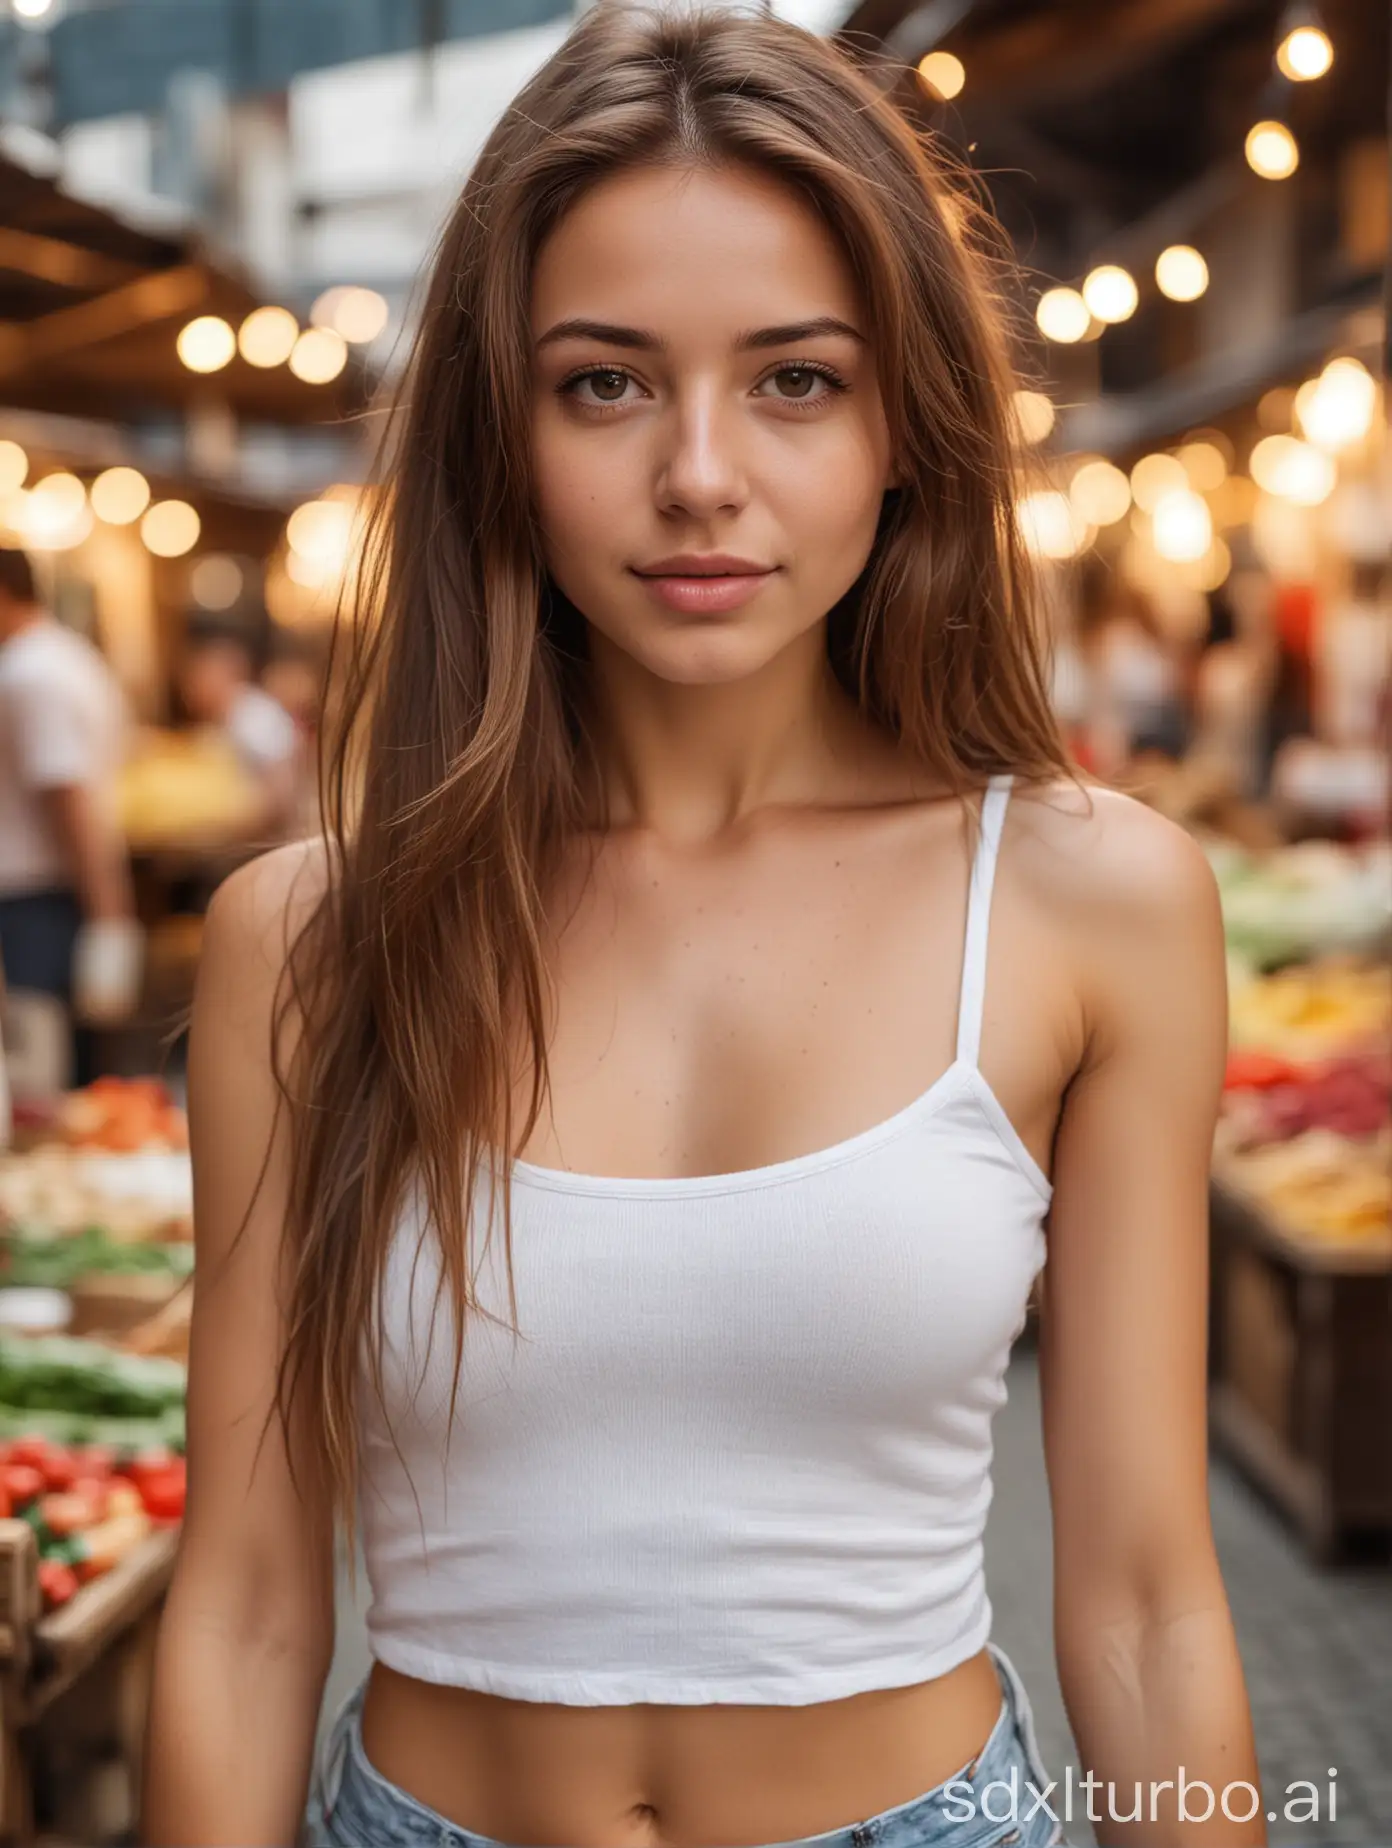 young woman, long brown hair, slim body, small breast, wearing white tank-top, close up, bokeh background, background of a market